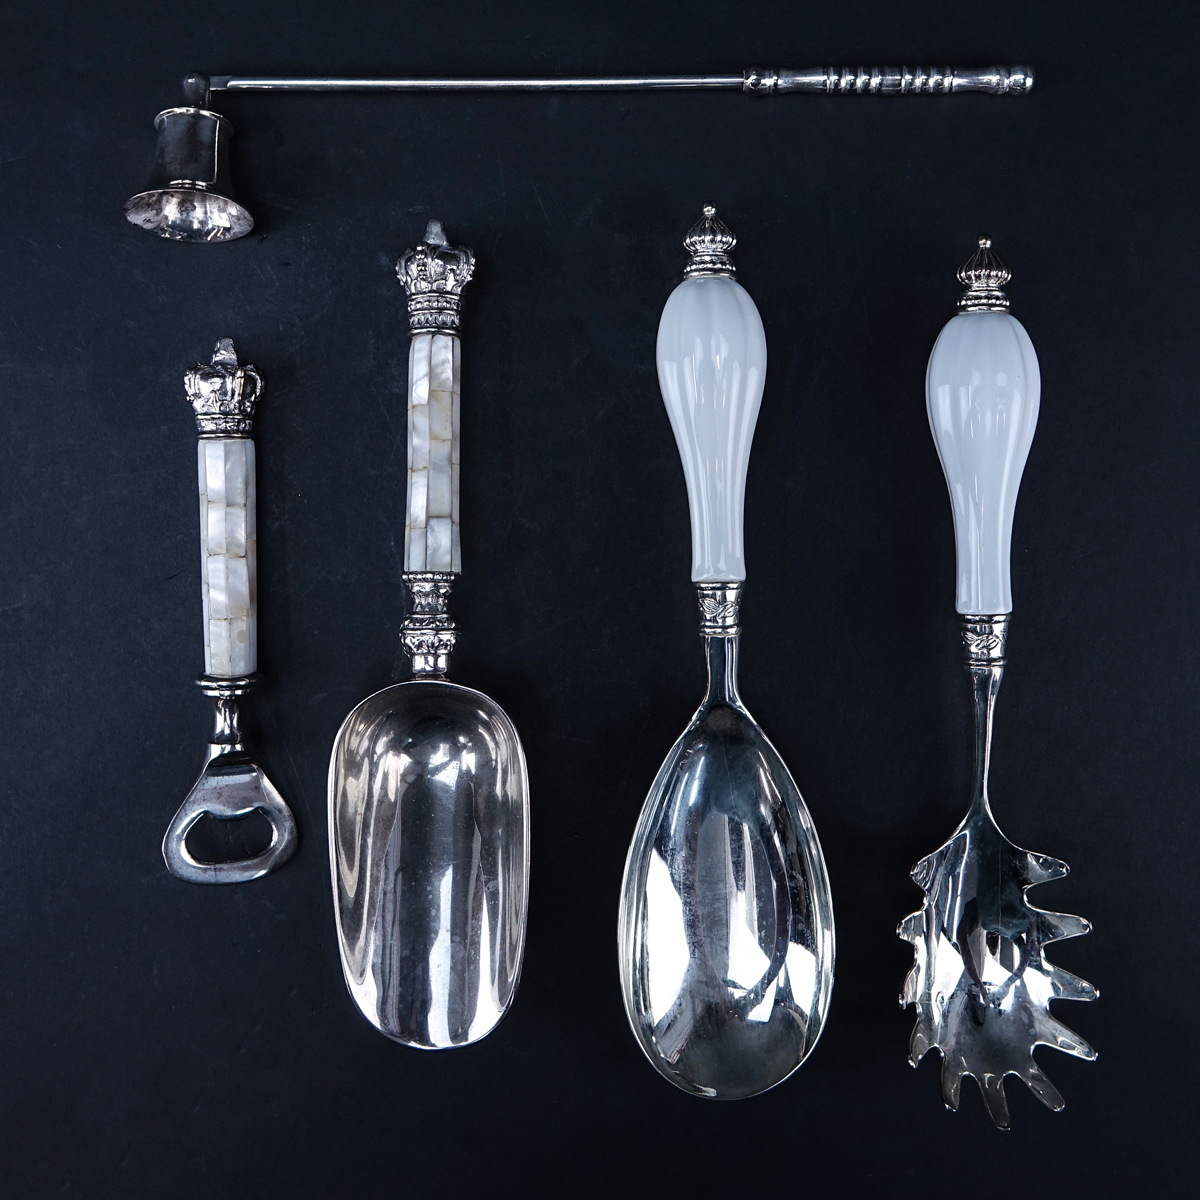 Collection of Five (5) Vintage Serving Pieces. Includes: Mother Of pearl Handled scoop and bottle opener, porcelain handled casserole spoon and past server, candle snuffer.